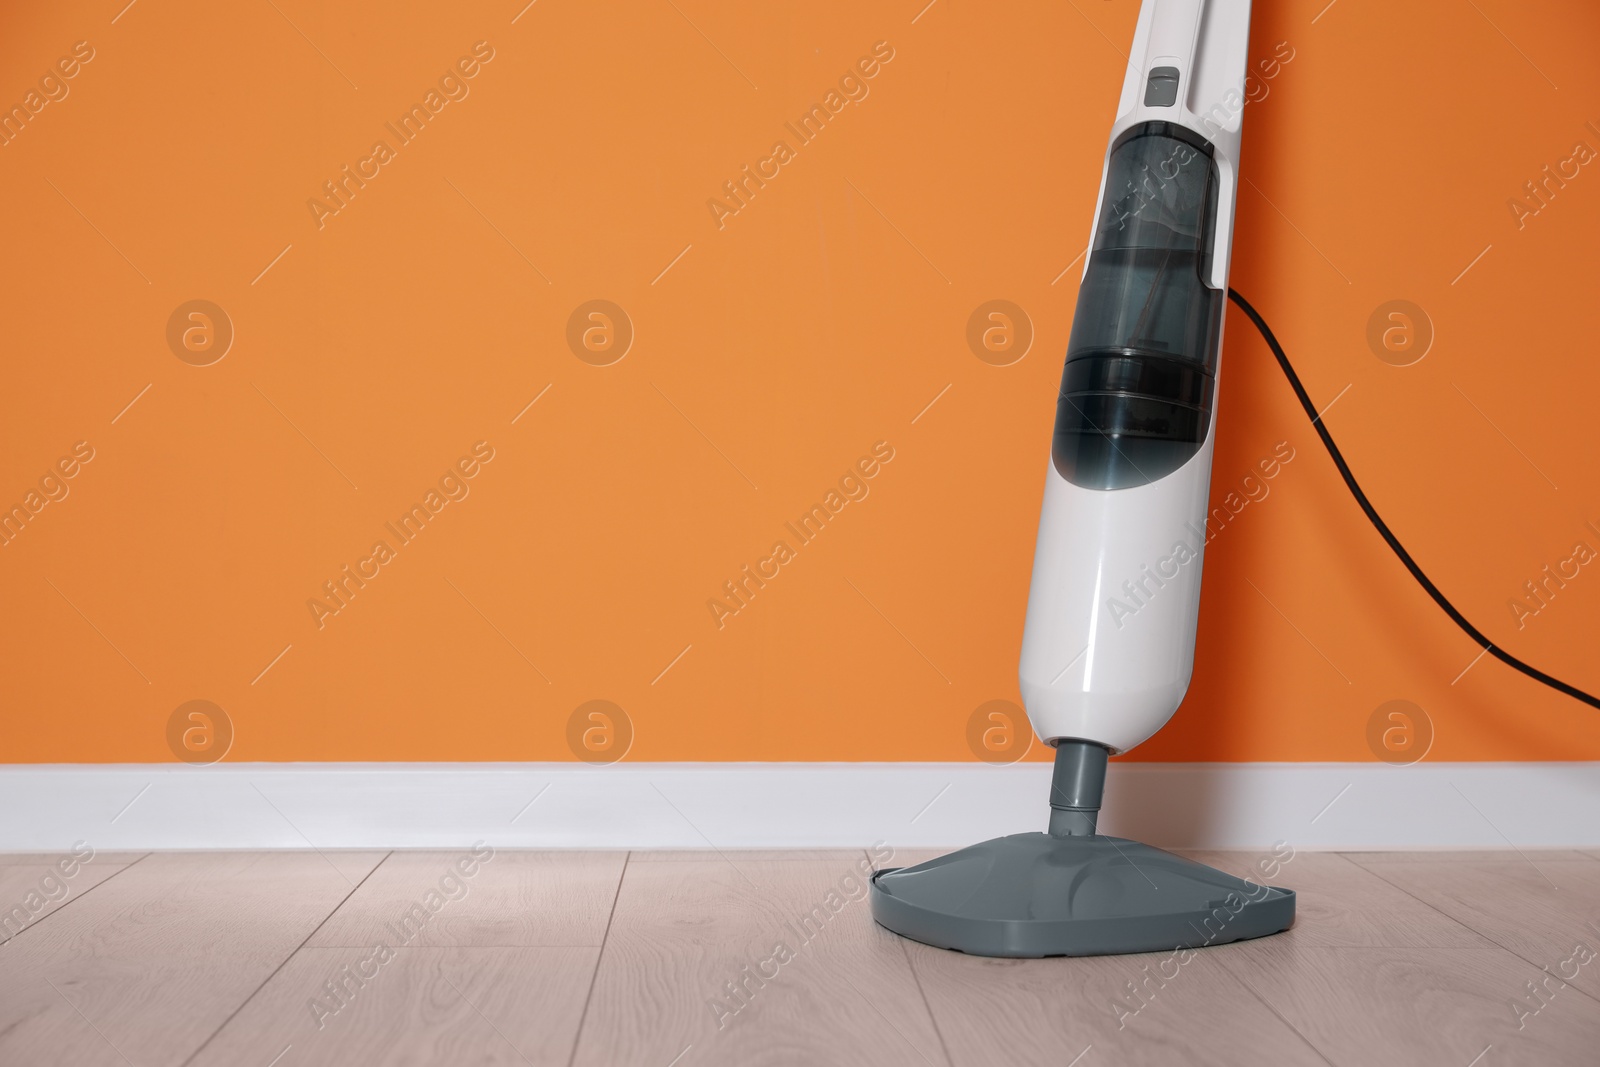 Photo of One modern steam mop on floor near orange wall, space for text